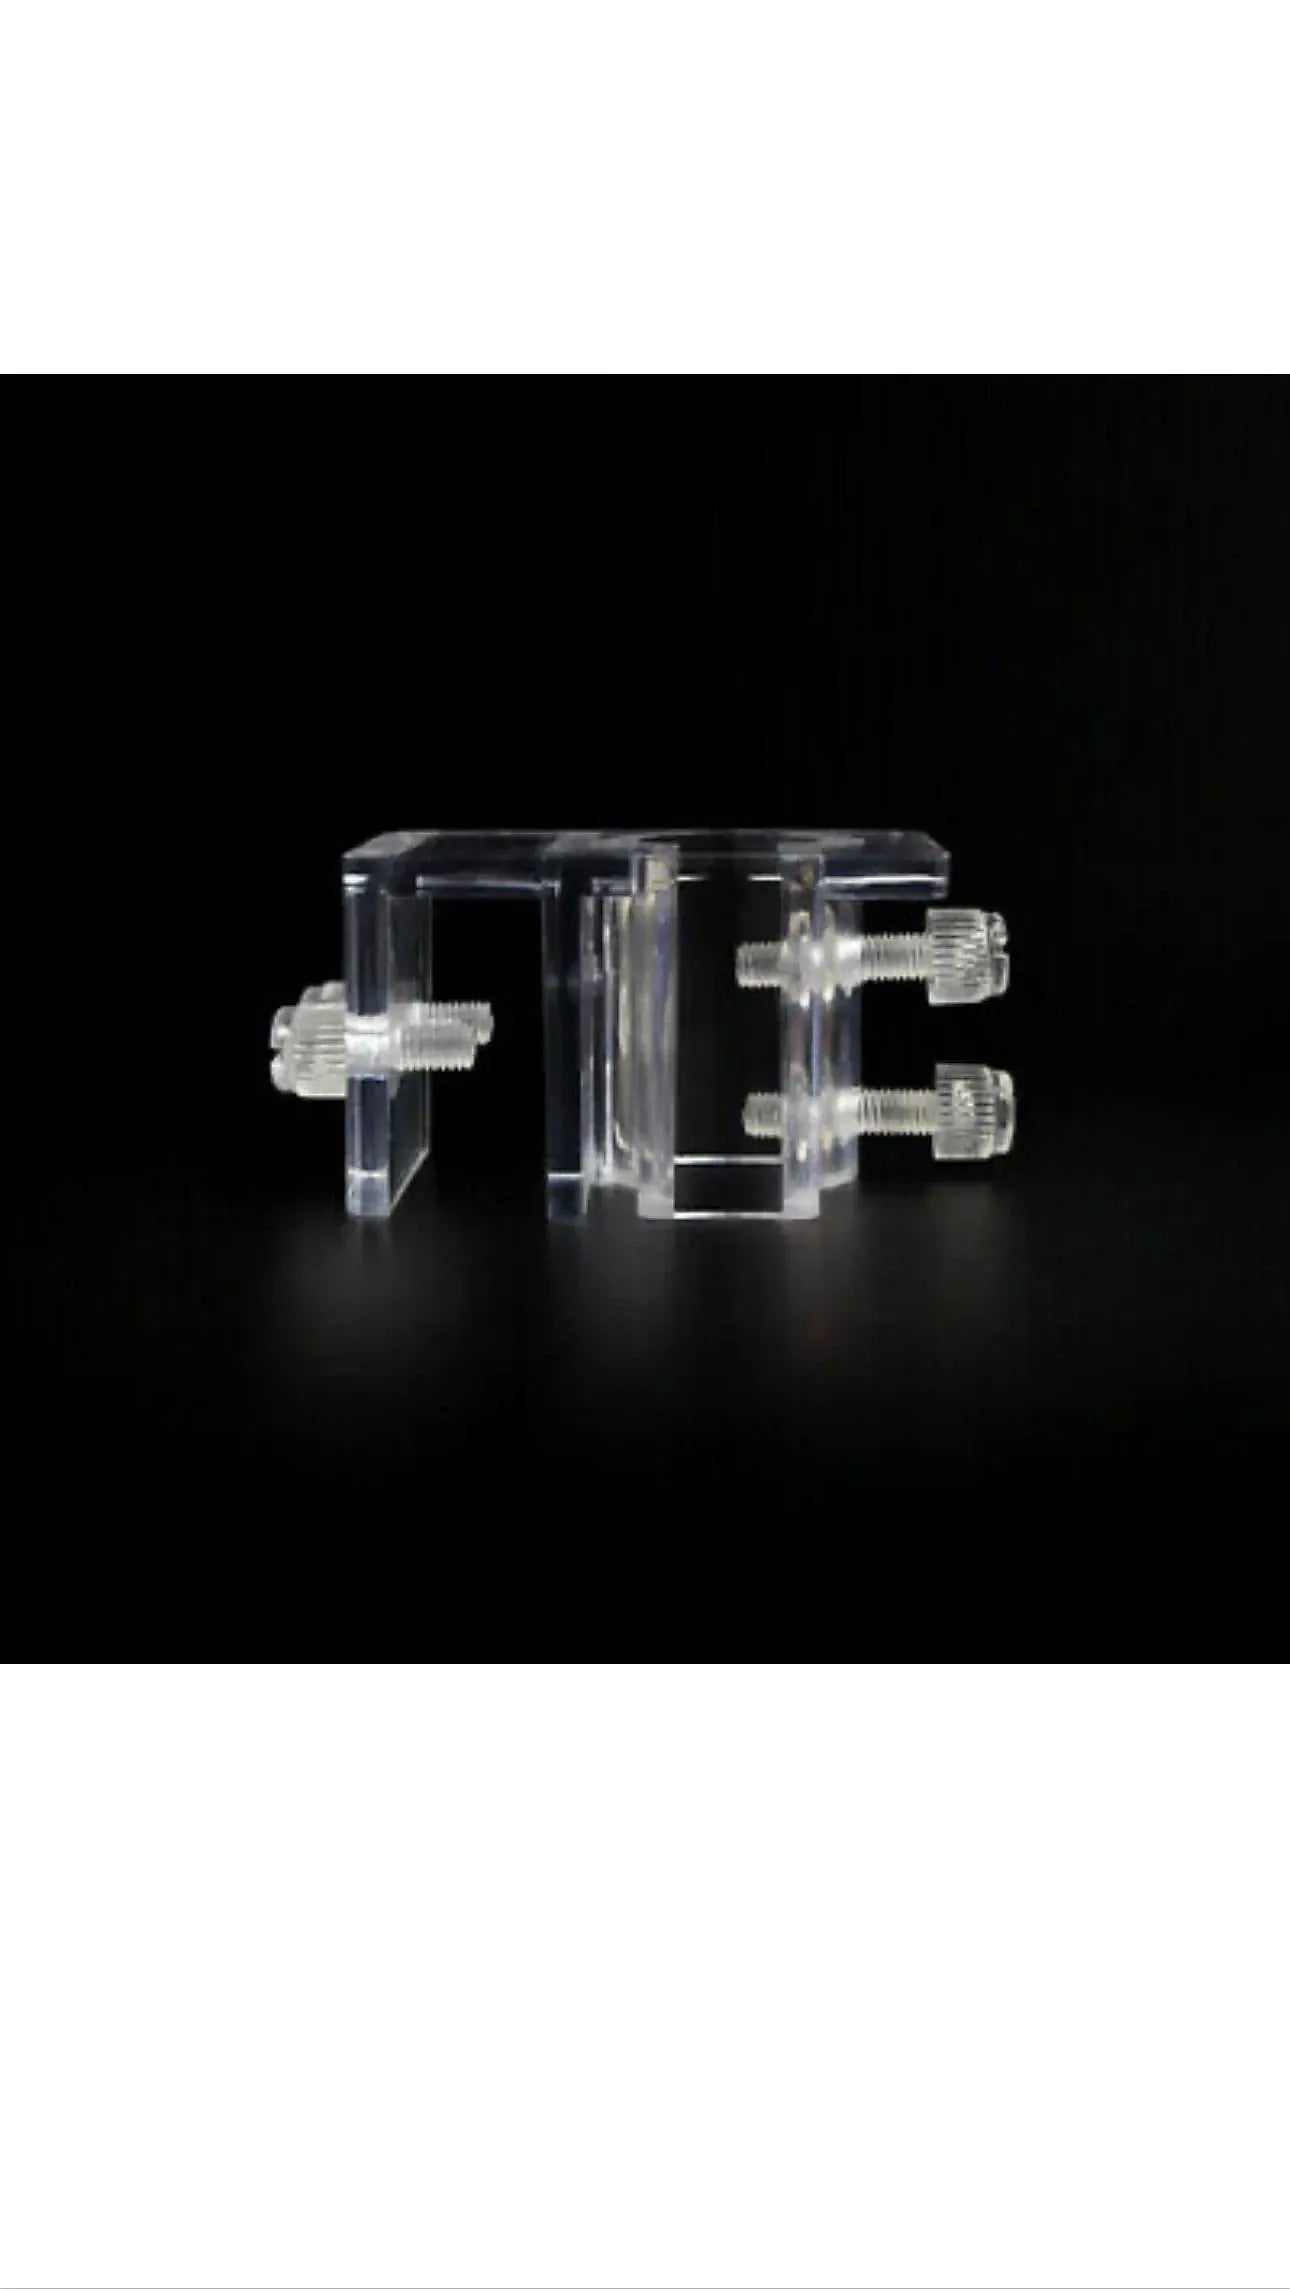 Acrylic Filter Pipe Holder- Lily pipe holder